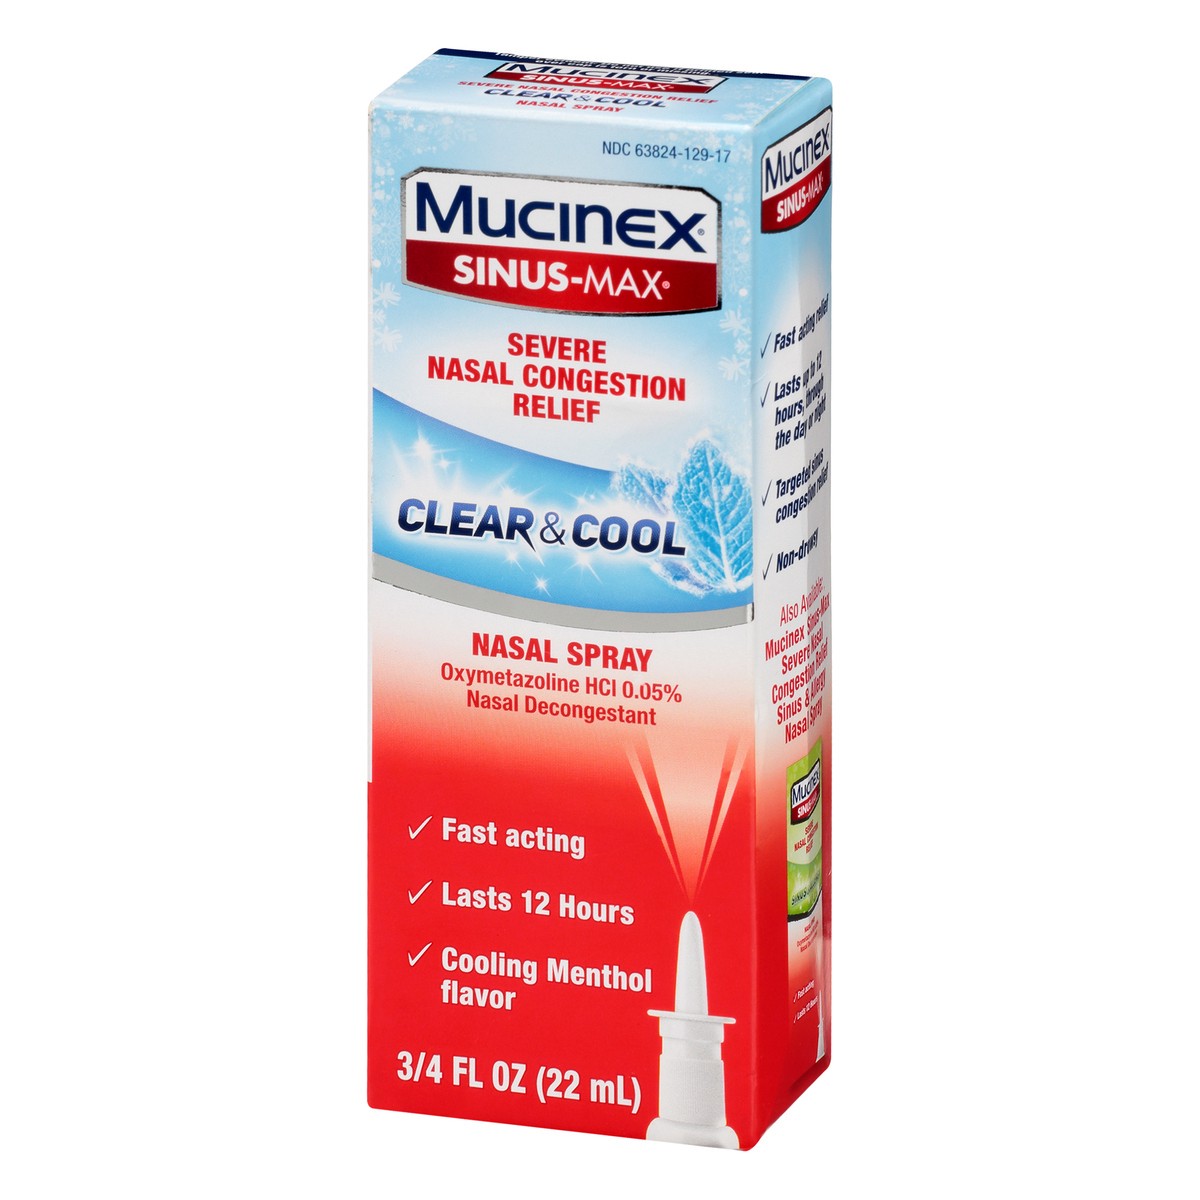 slide 3 of 9, Mucinex Sinus-Max Severe Nasal Congestion Relief Clear & Cool Nasal Spray, 0.75 fl. oz., Lasts 12 Hours, Fast Acting, Cooling Menthol Flavor, 0.75 fl oz